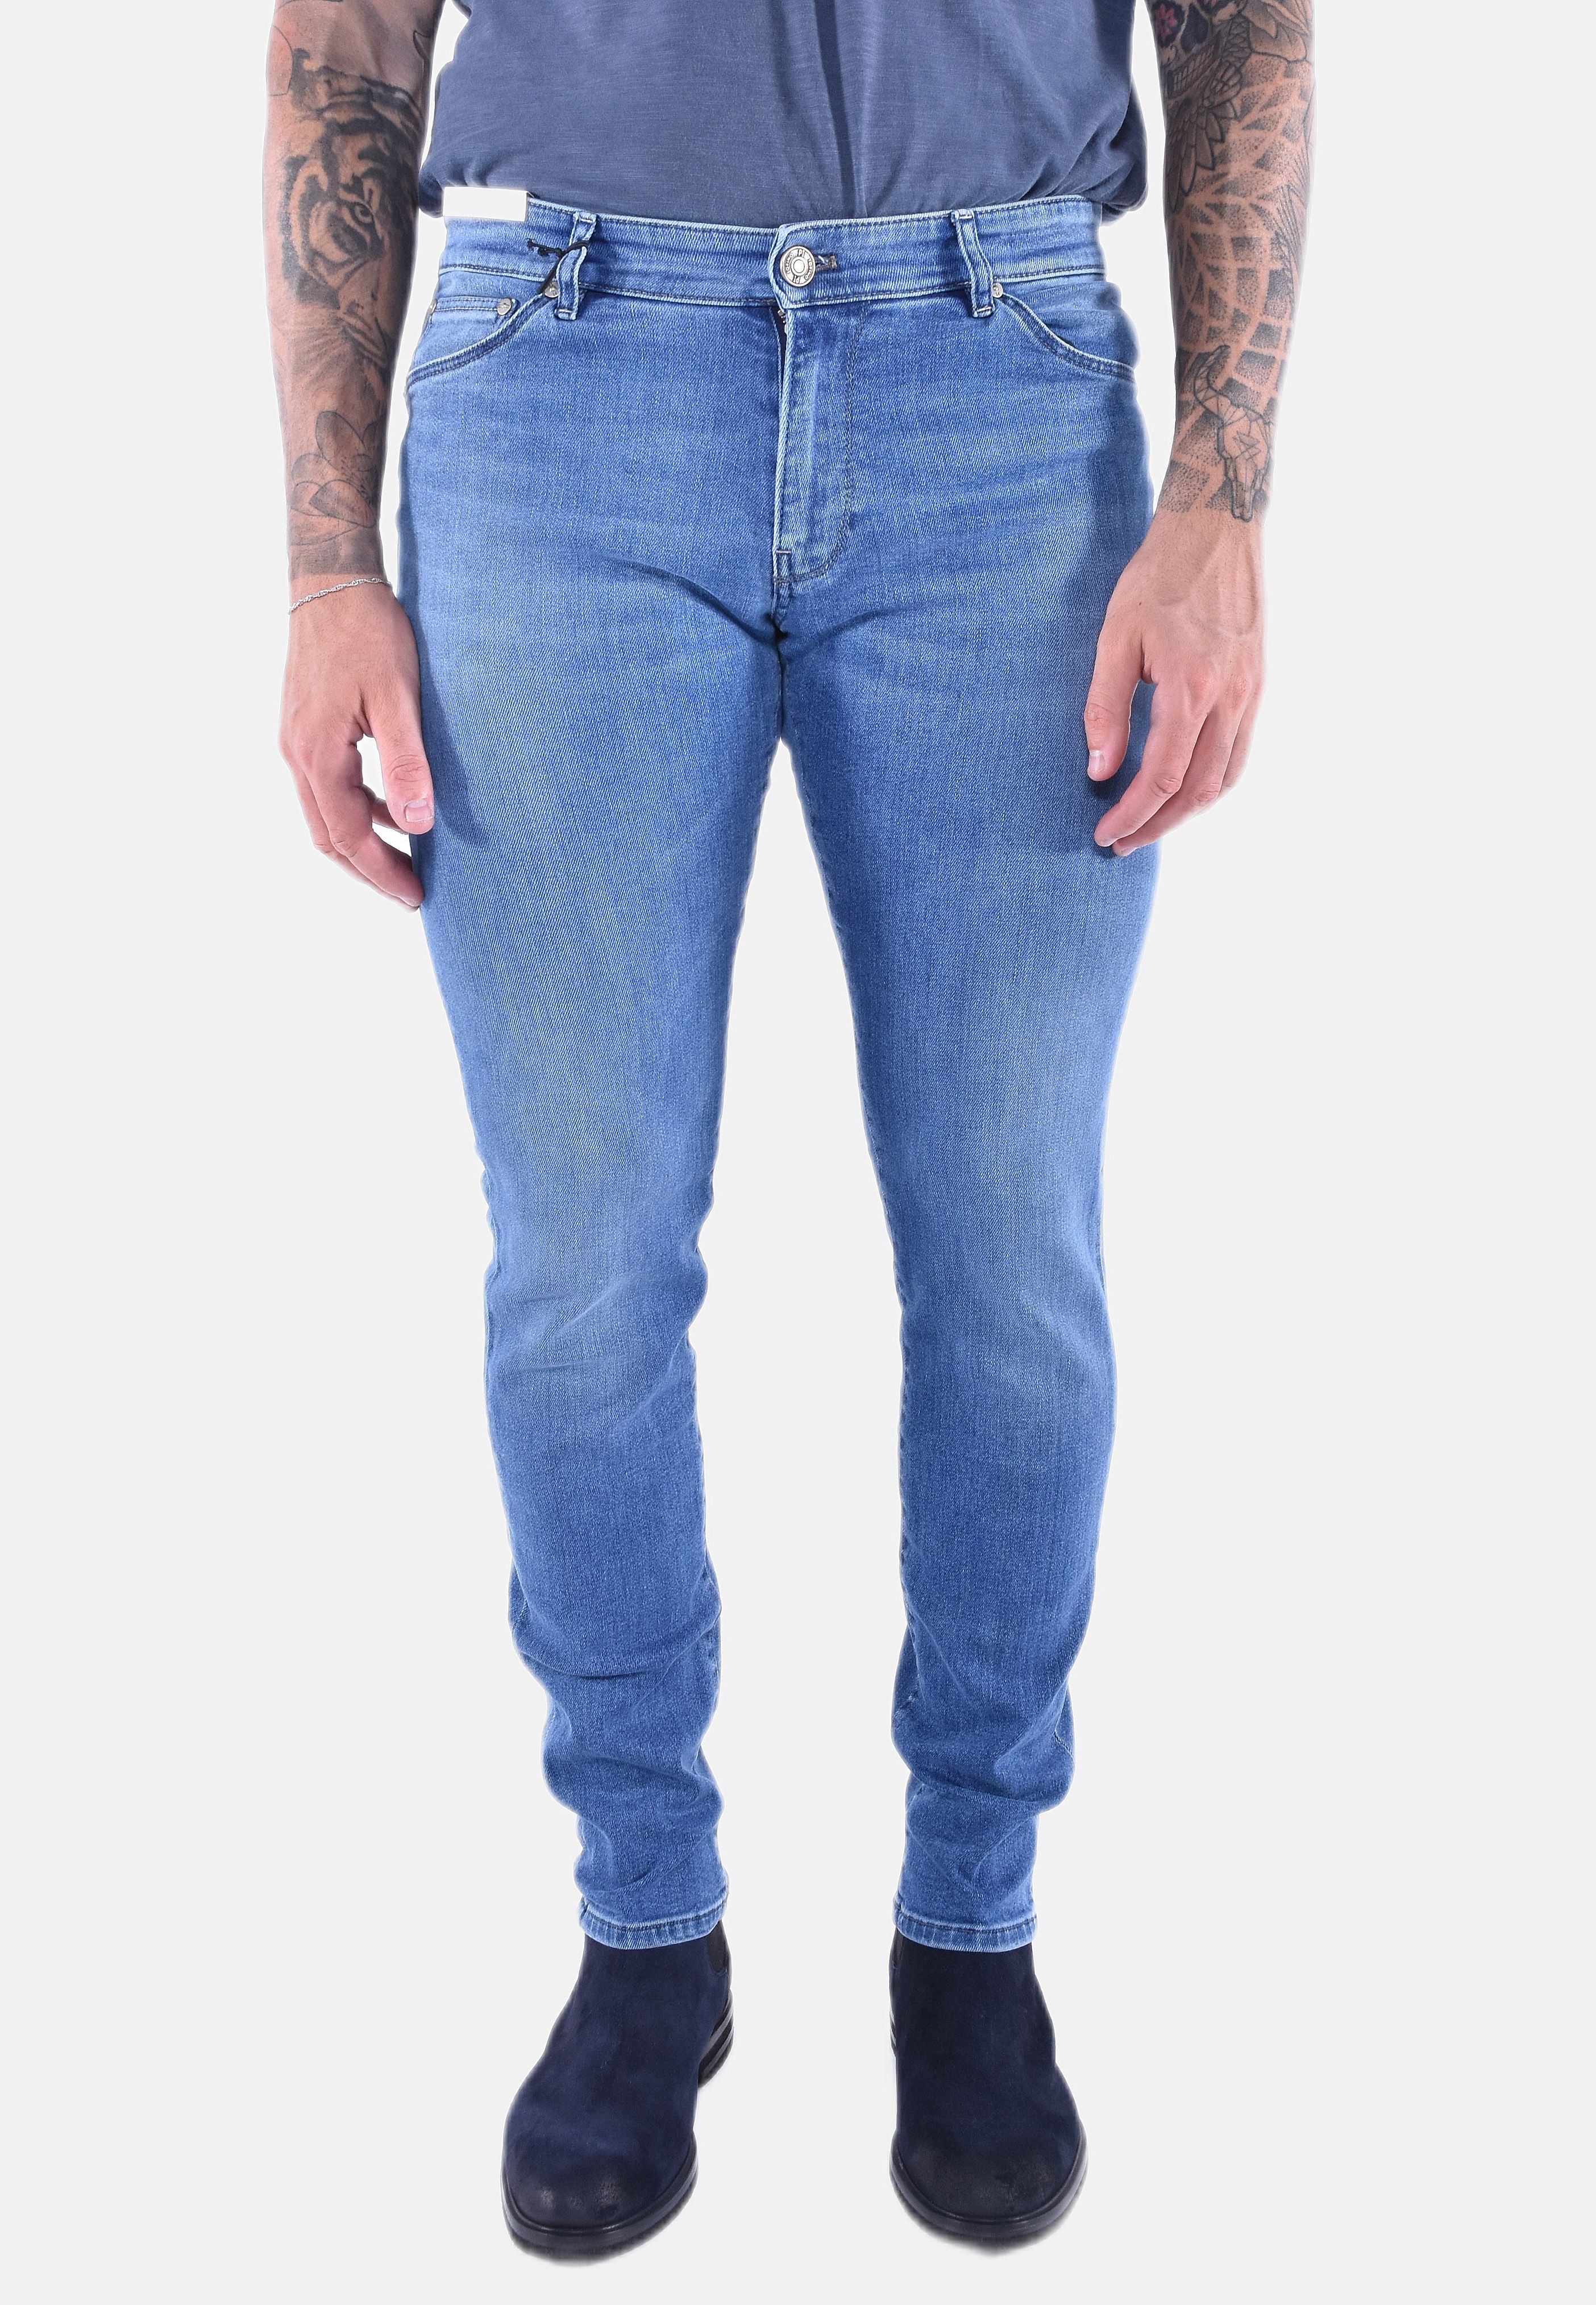 JEANS SWING SOFT TOUCH STRETCH 9oz